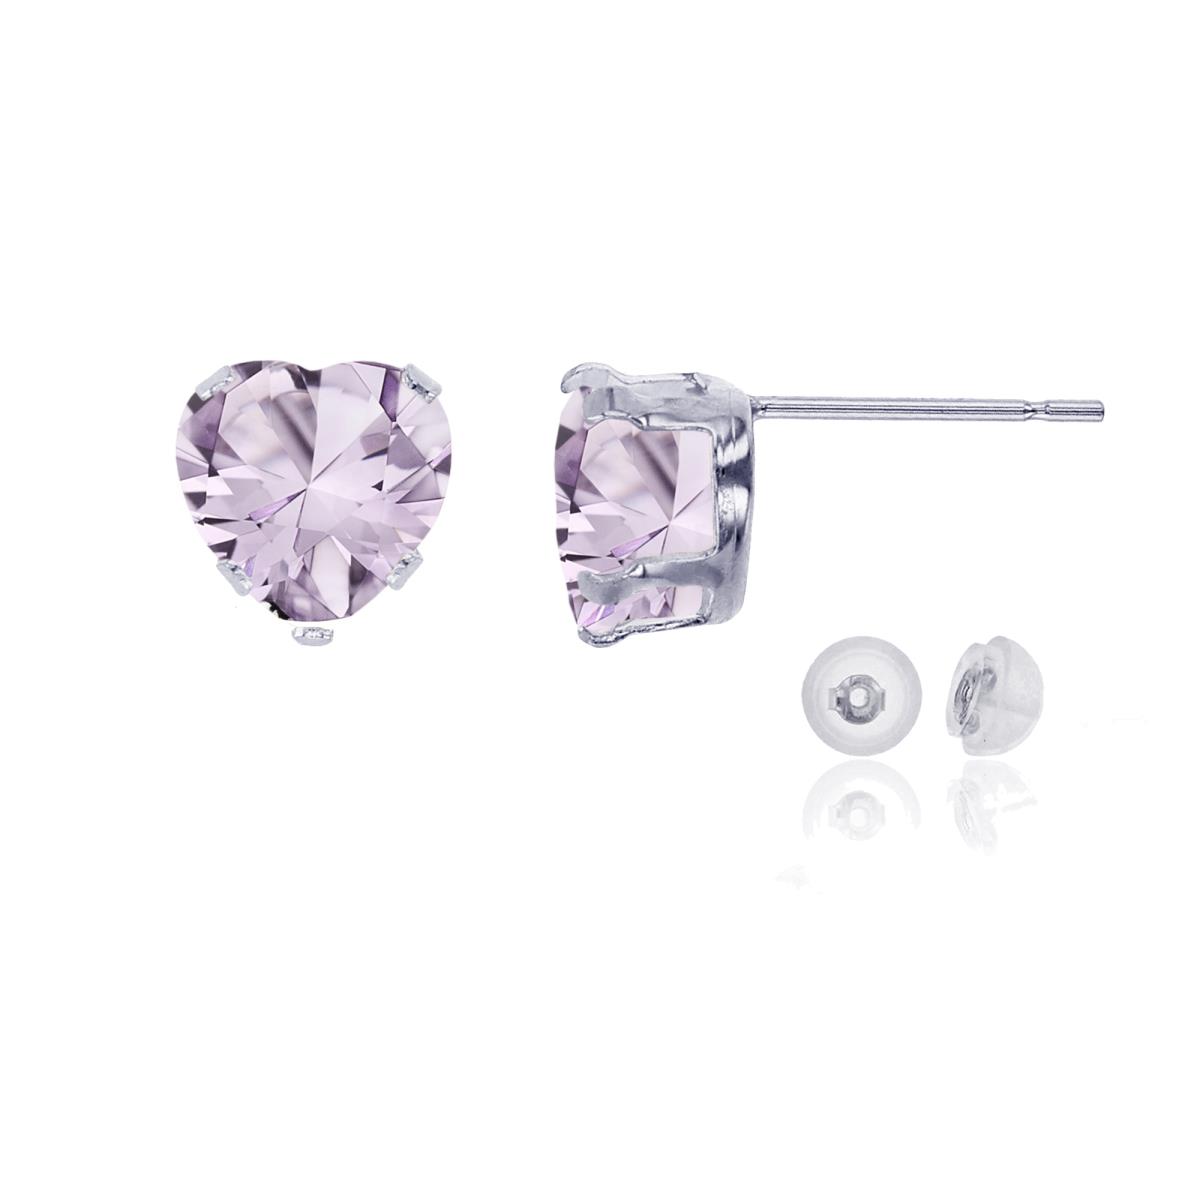 10K White Gold 6x6mm Heart Rose De France Stud Earring with Silicone Back